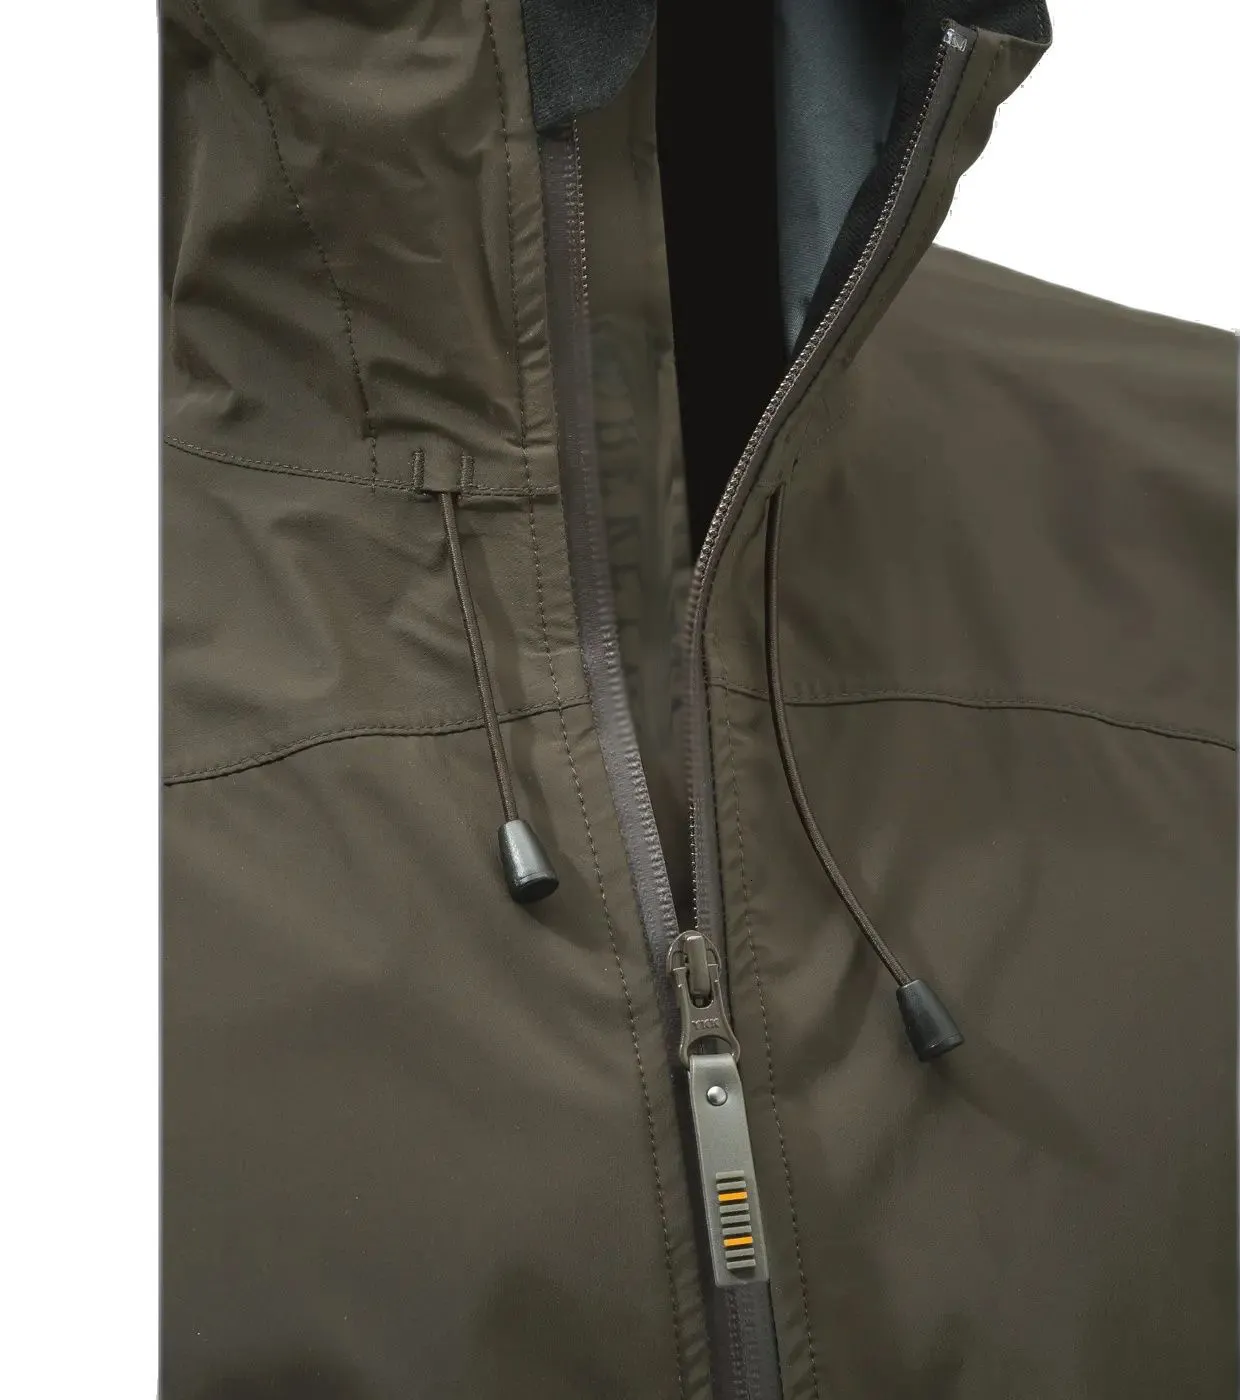 Lightweight 3L Waterproof Jackets For Hunting, Camping, Fishing Waterproof,  Breathable, And Rainproof Outwear Style 230804 From Zhao03, $68.84